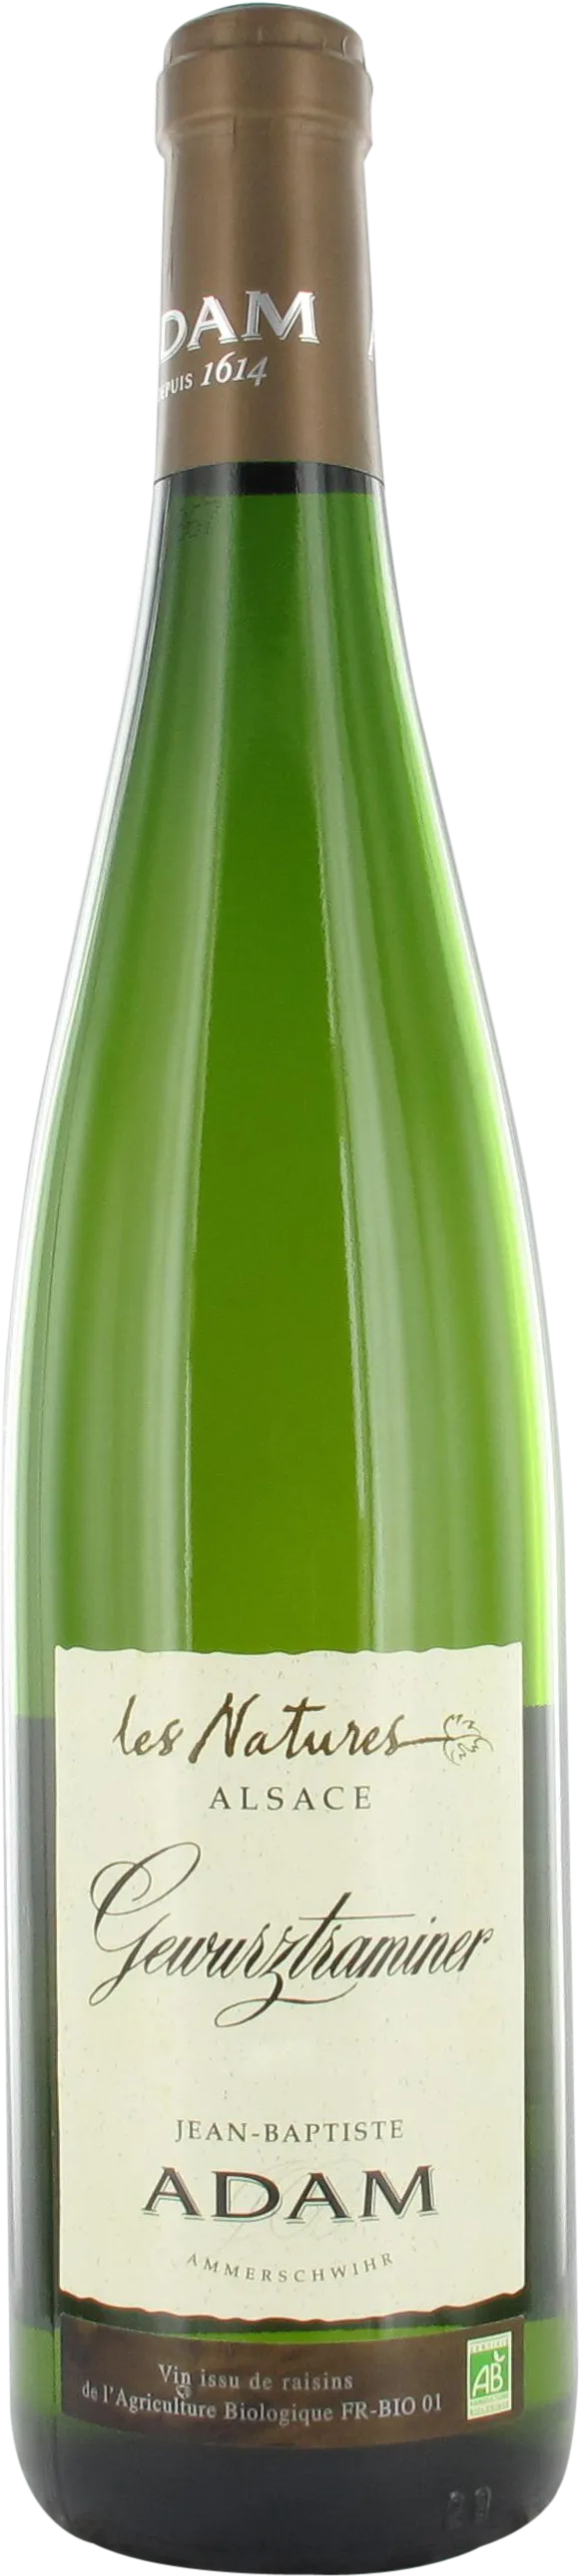 Bottle of Jean-Baptiste Adam Les Natures Gewürztraminer from search results